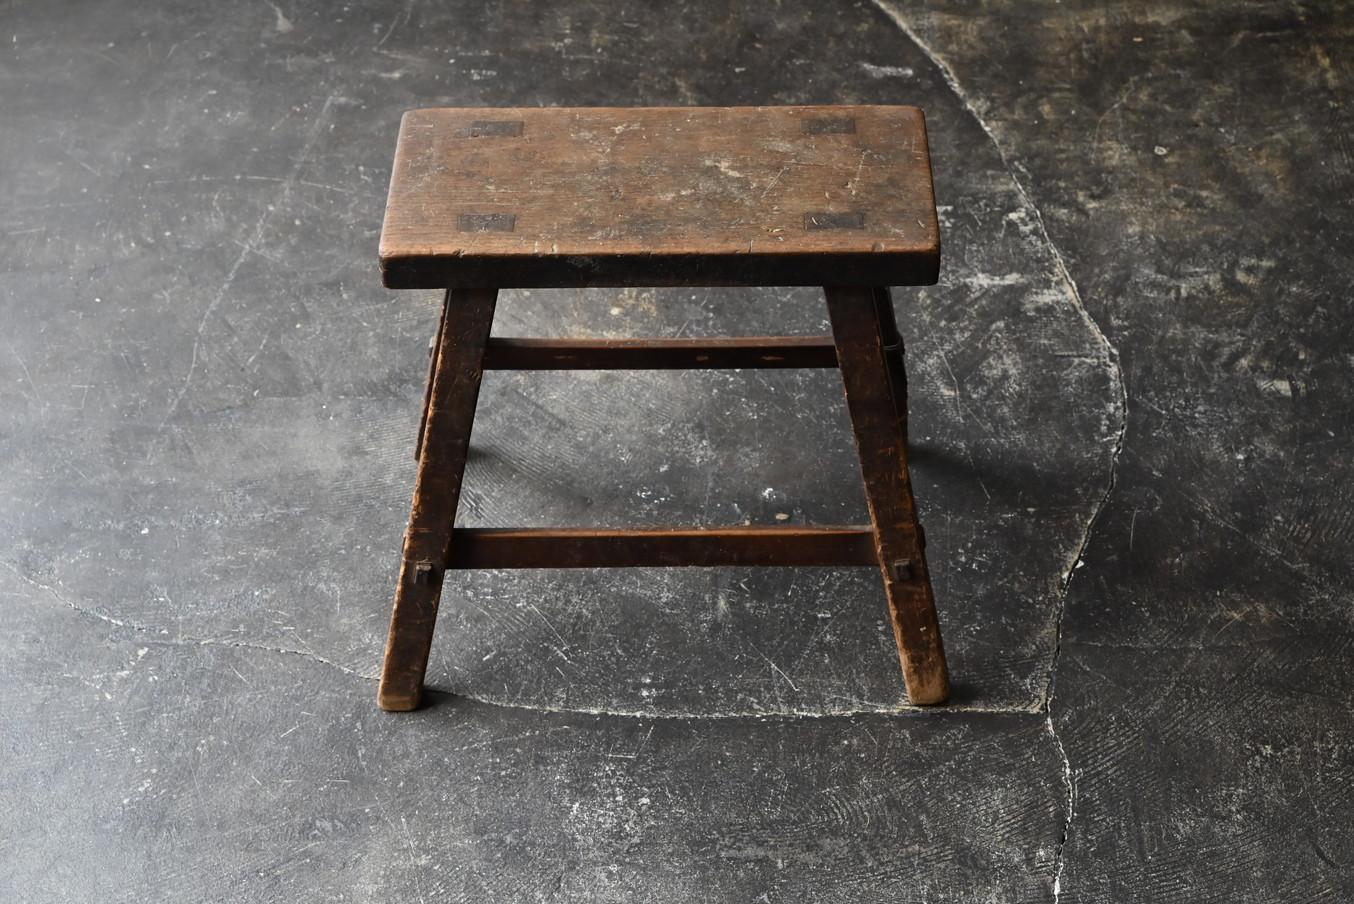 This is a stool that was made from the Taisho period to the mid-Showa period (1910 to 1960) in Japan.
They are often used in factories and craftsmen's workshops, but they were also found in ordinary households.
The material is probably wood such as